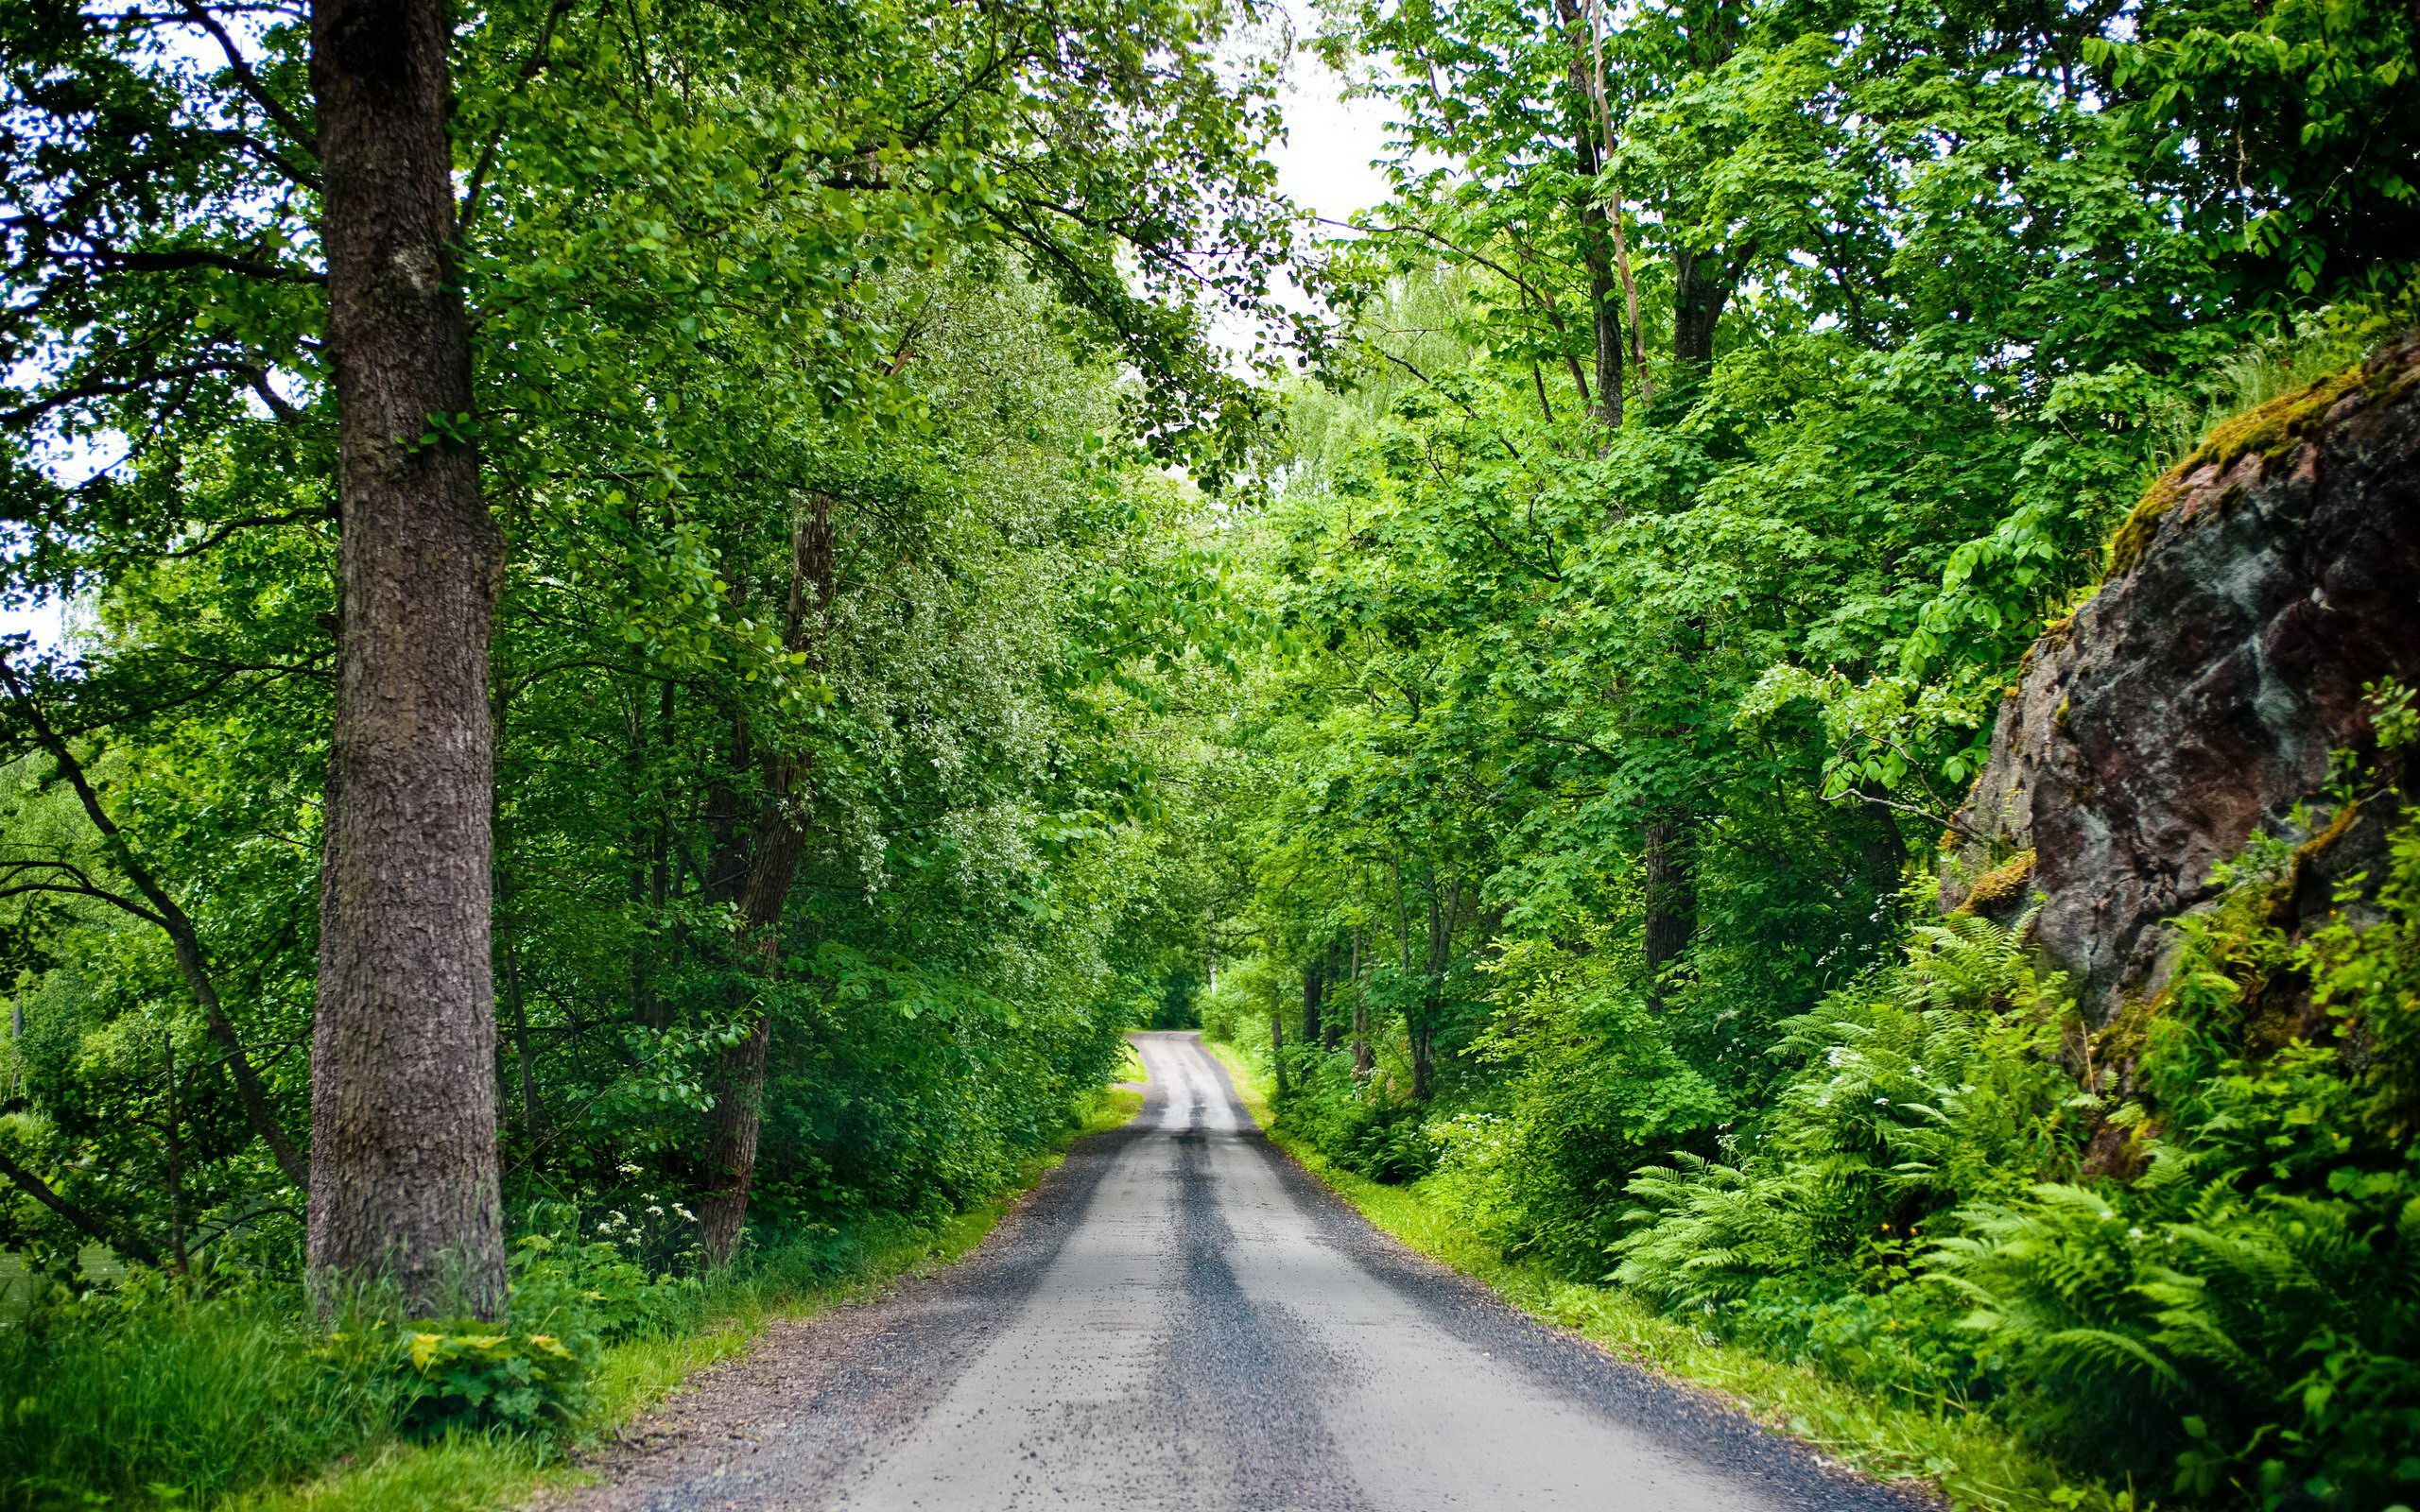 Download wallpaper: road in Forest, trees, green Forest, photo